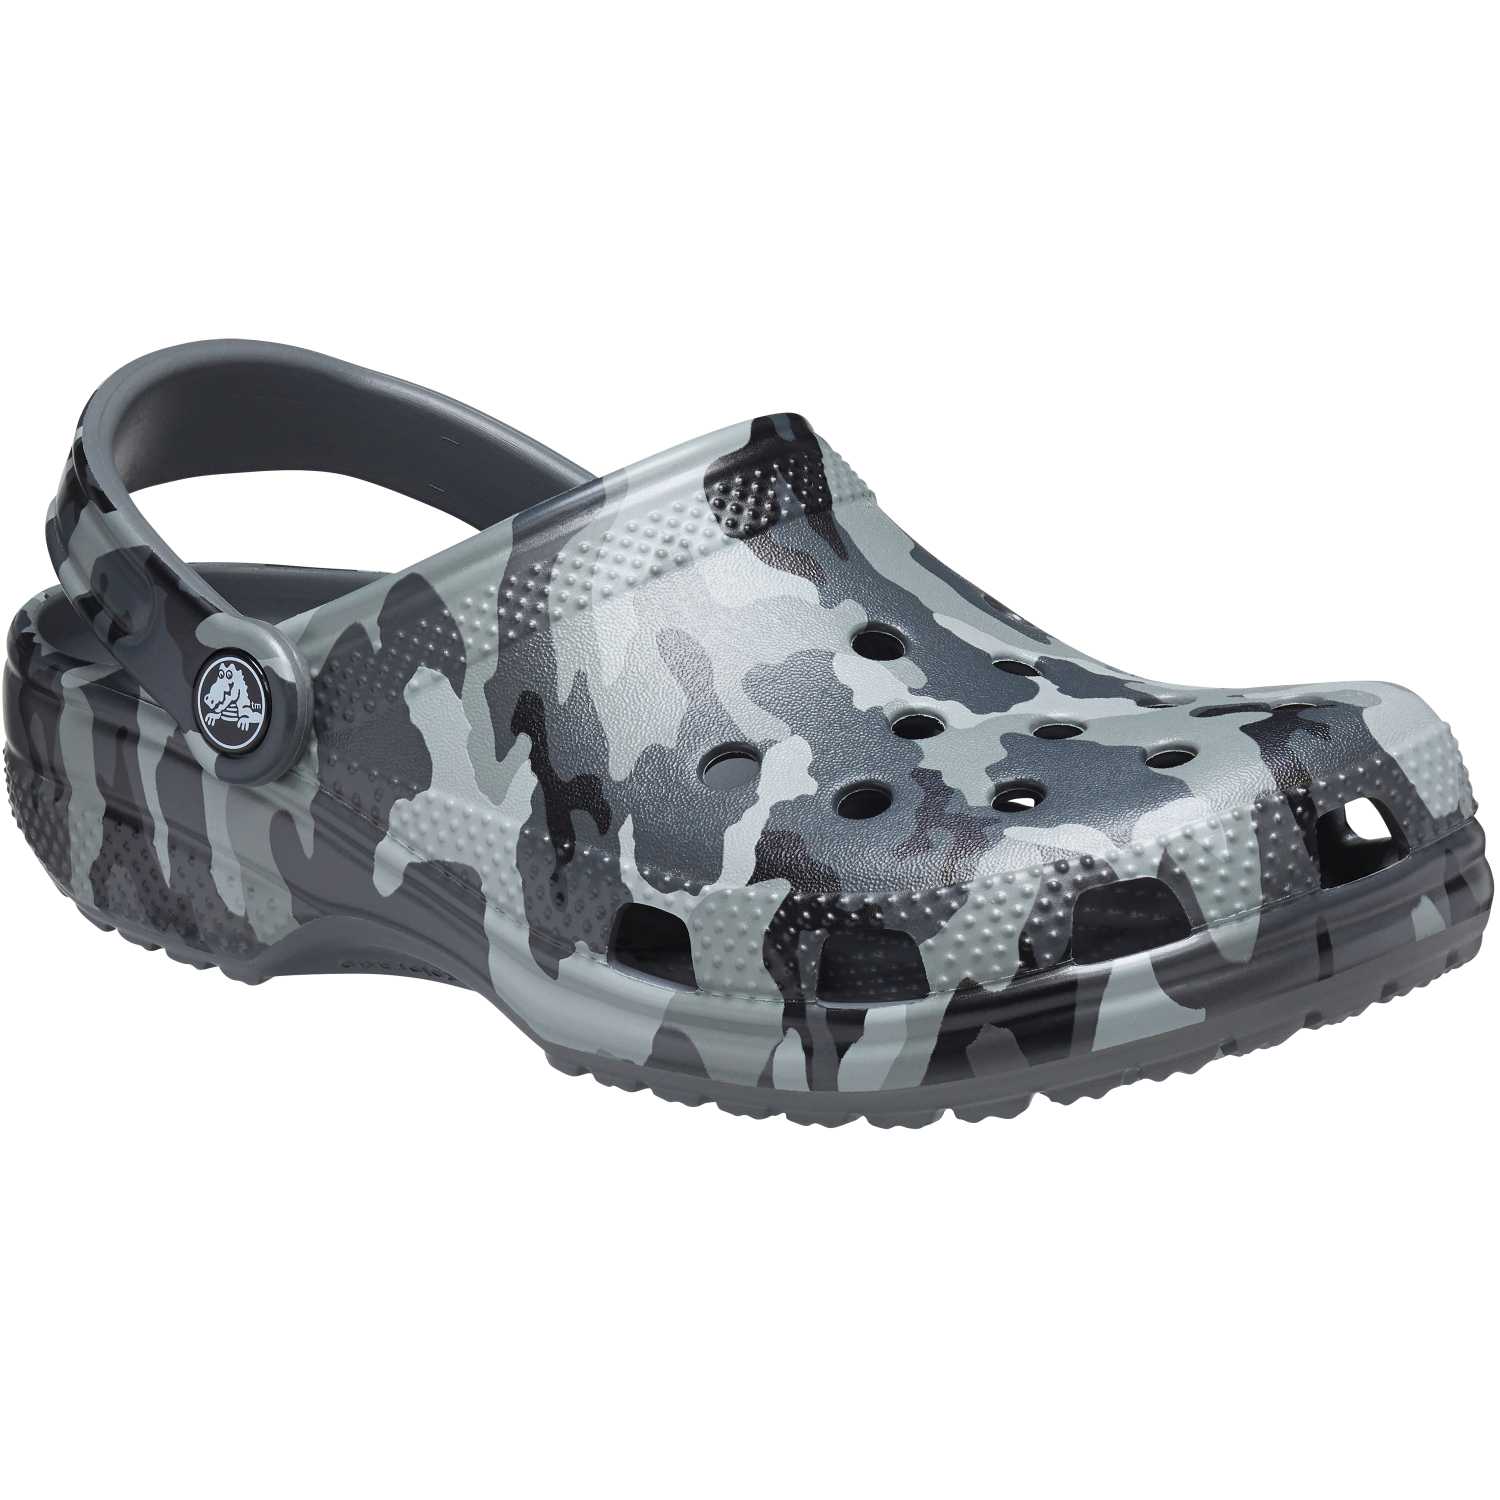 Crocs Unisex Classic printed (camou/grey) at low prices